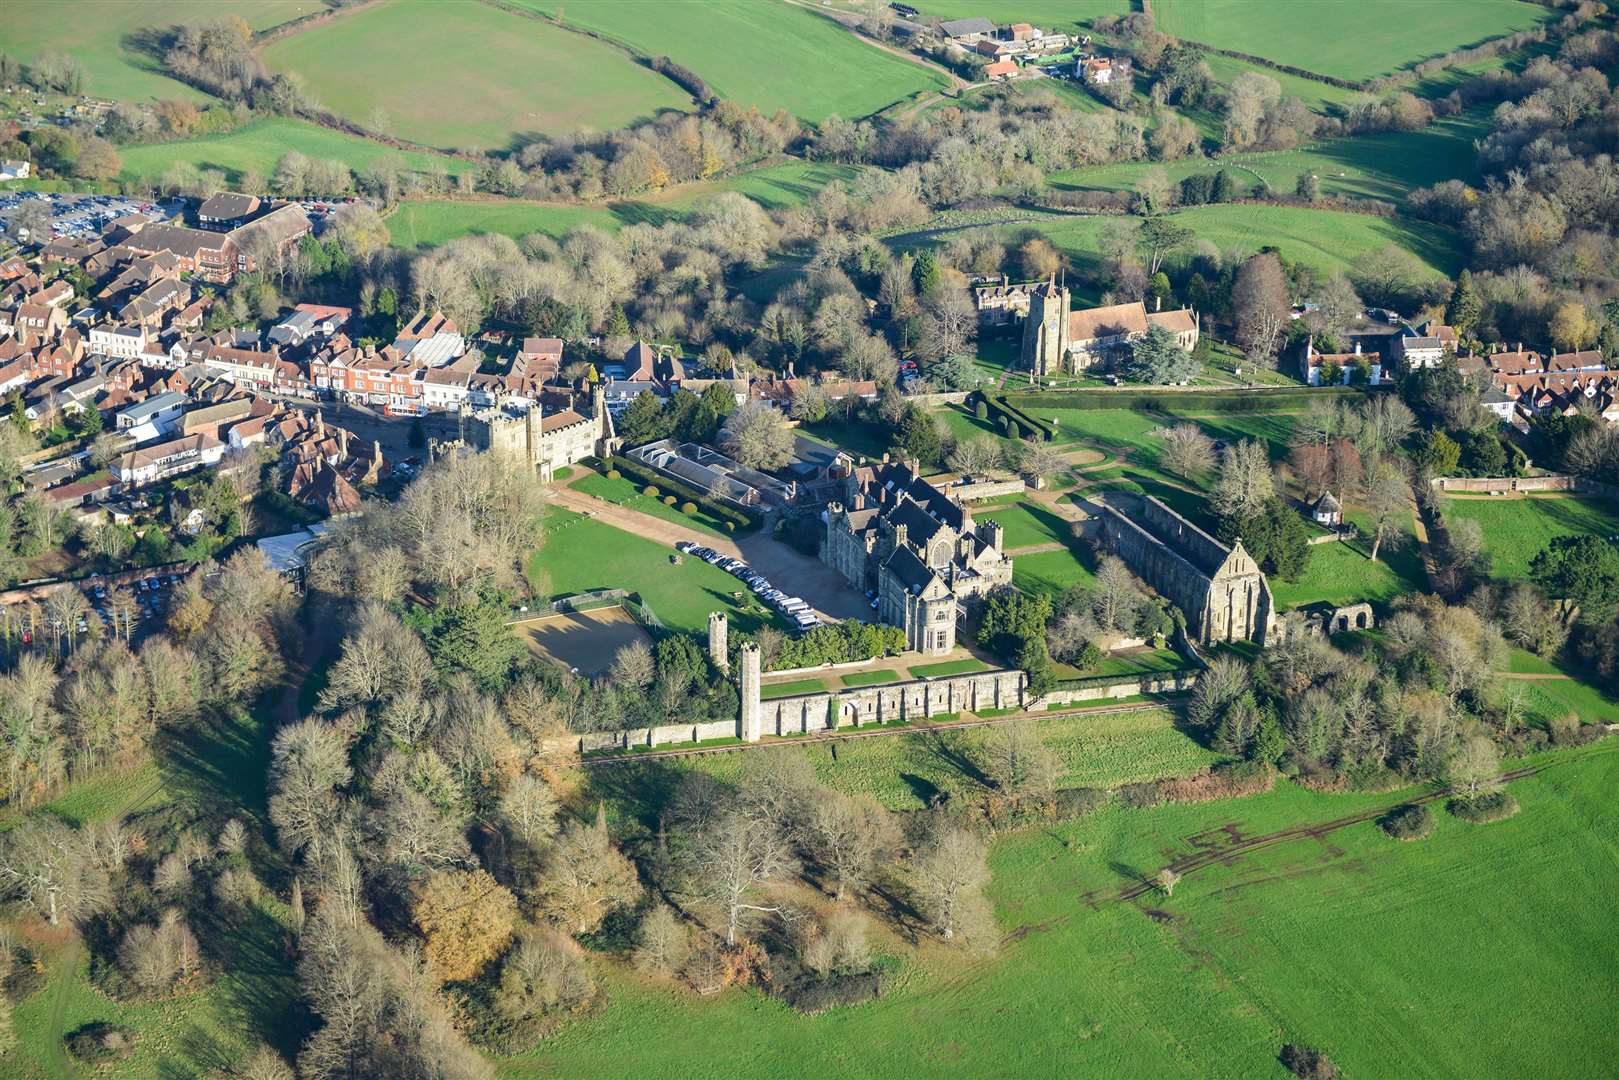 The remains of Battle Abbey and current Battle Abbey School, East Sussex